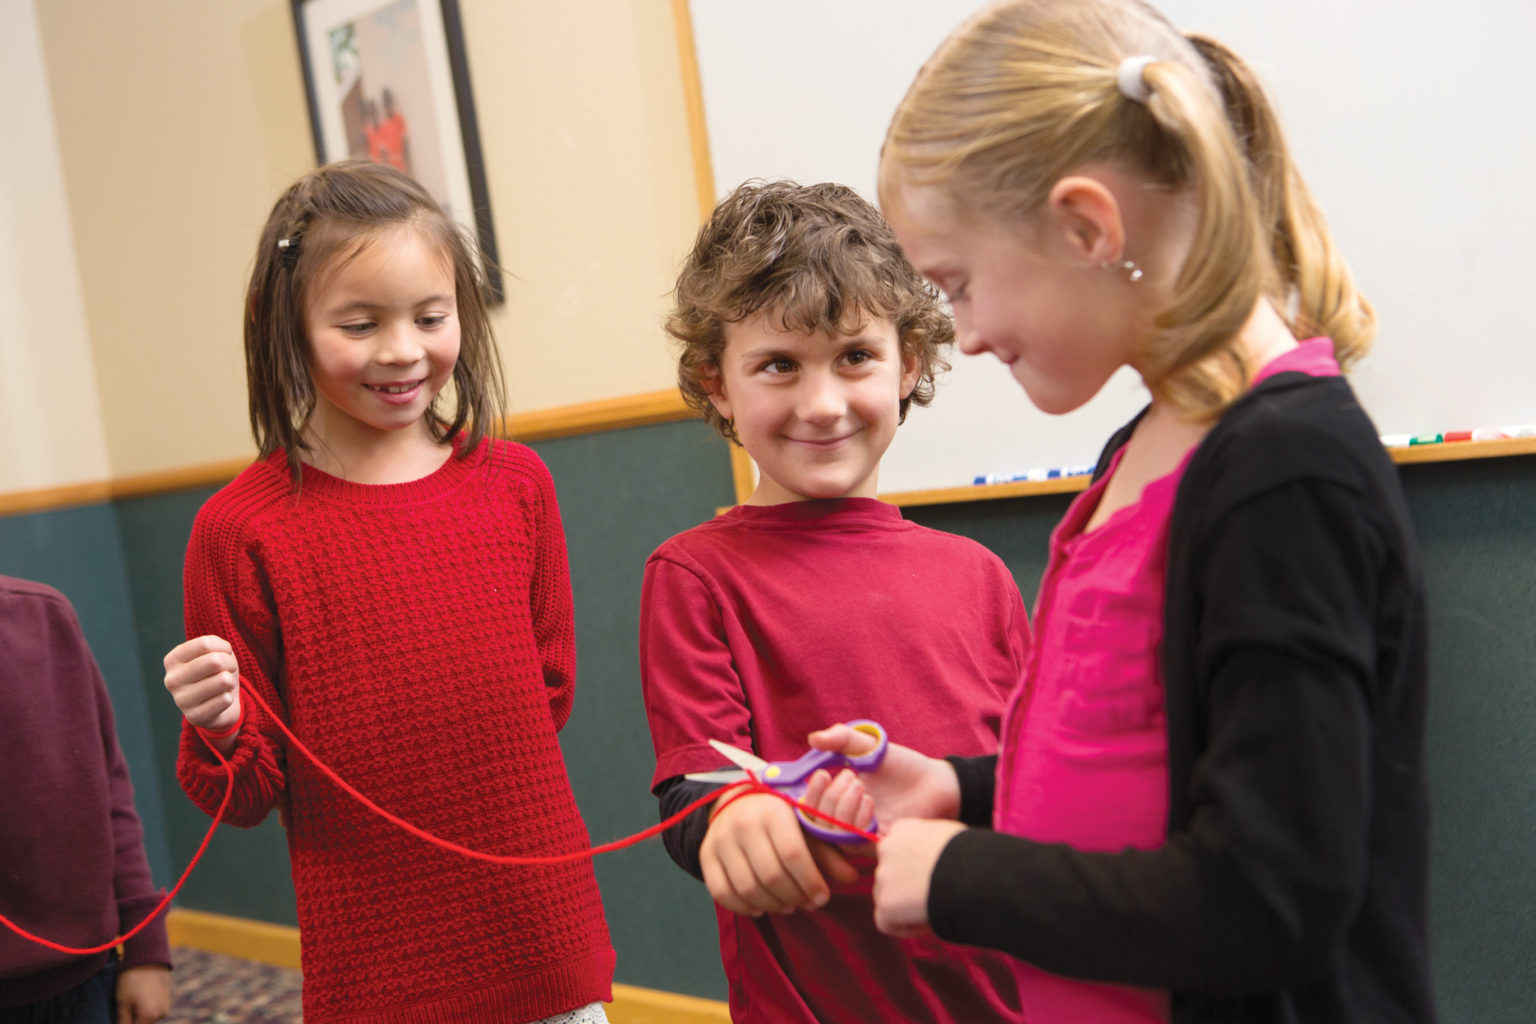 A group of children have yarn tied around their wrists. One girl is freeing them with scissors.